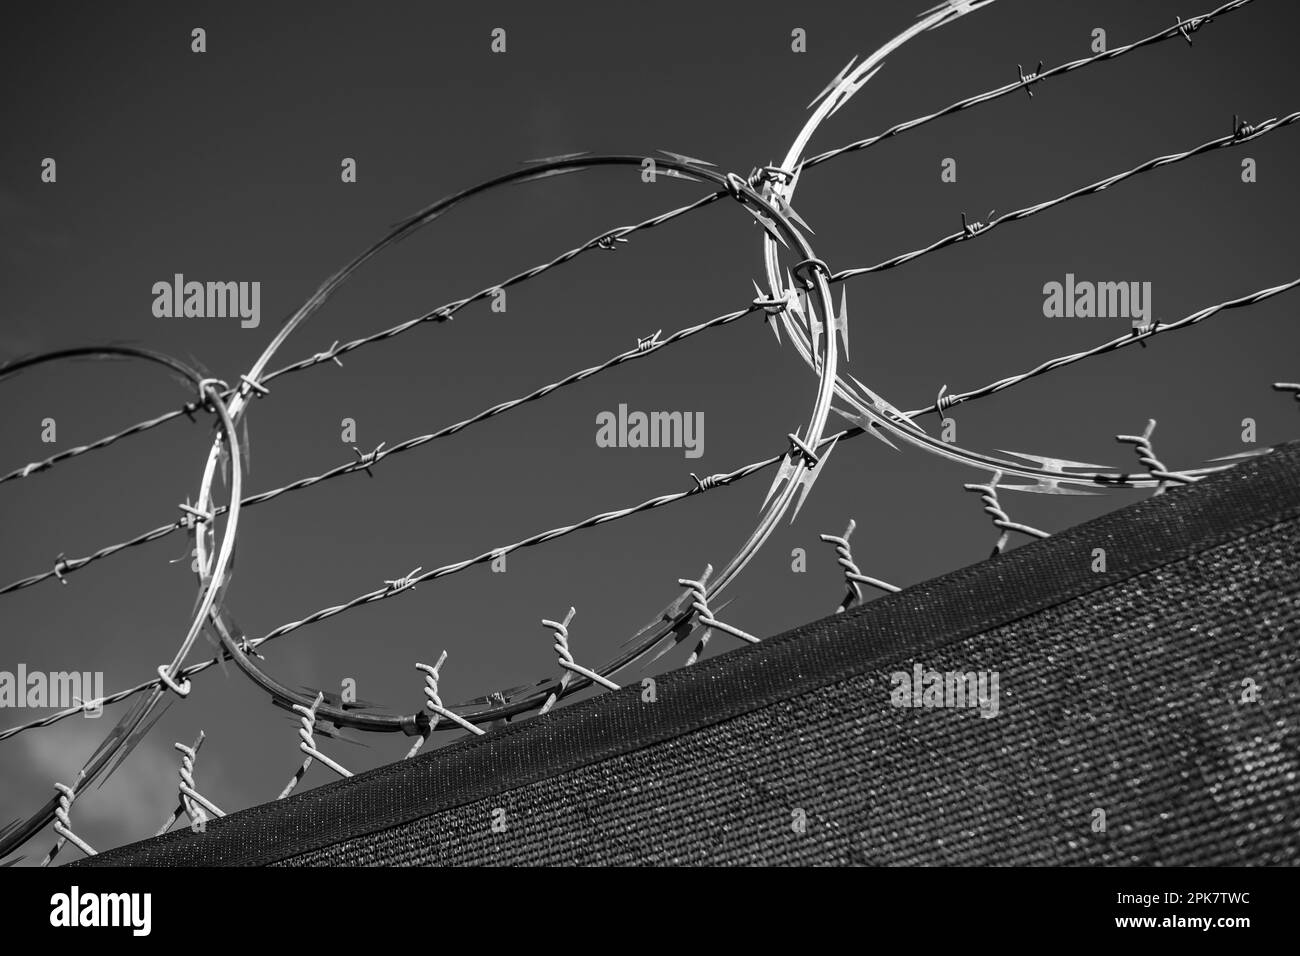 A barbed wire fence and draped frabric. Stock Photo